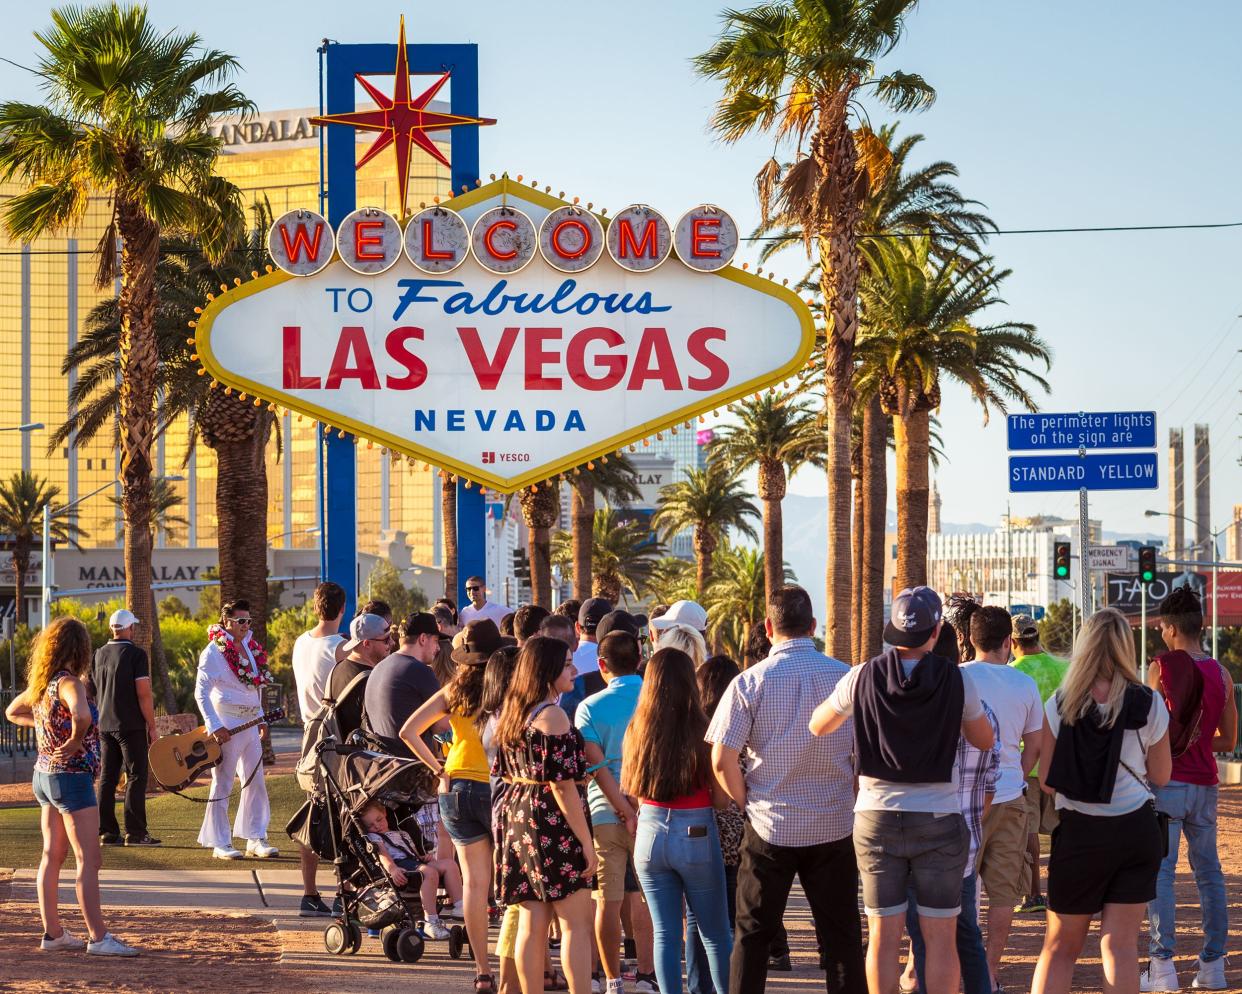 crowds in front of the iconic 'Welcome to Fabulous Las Vegas' sign